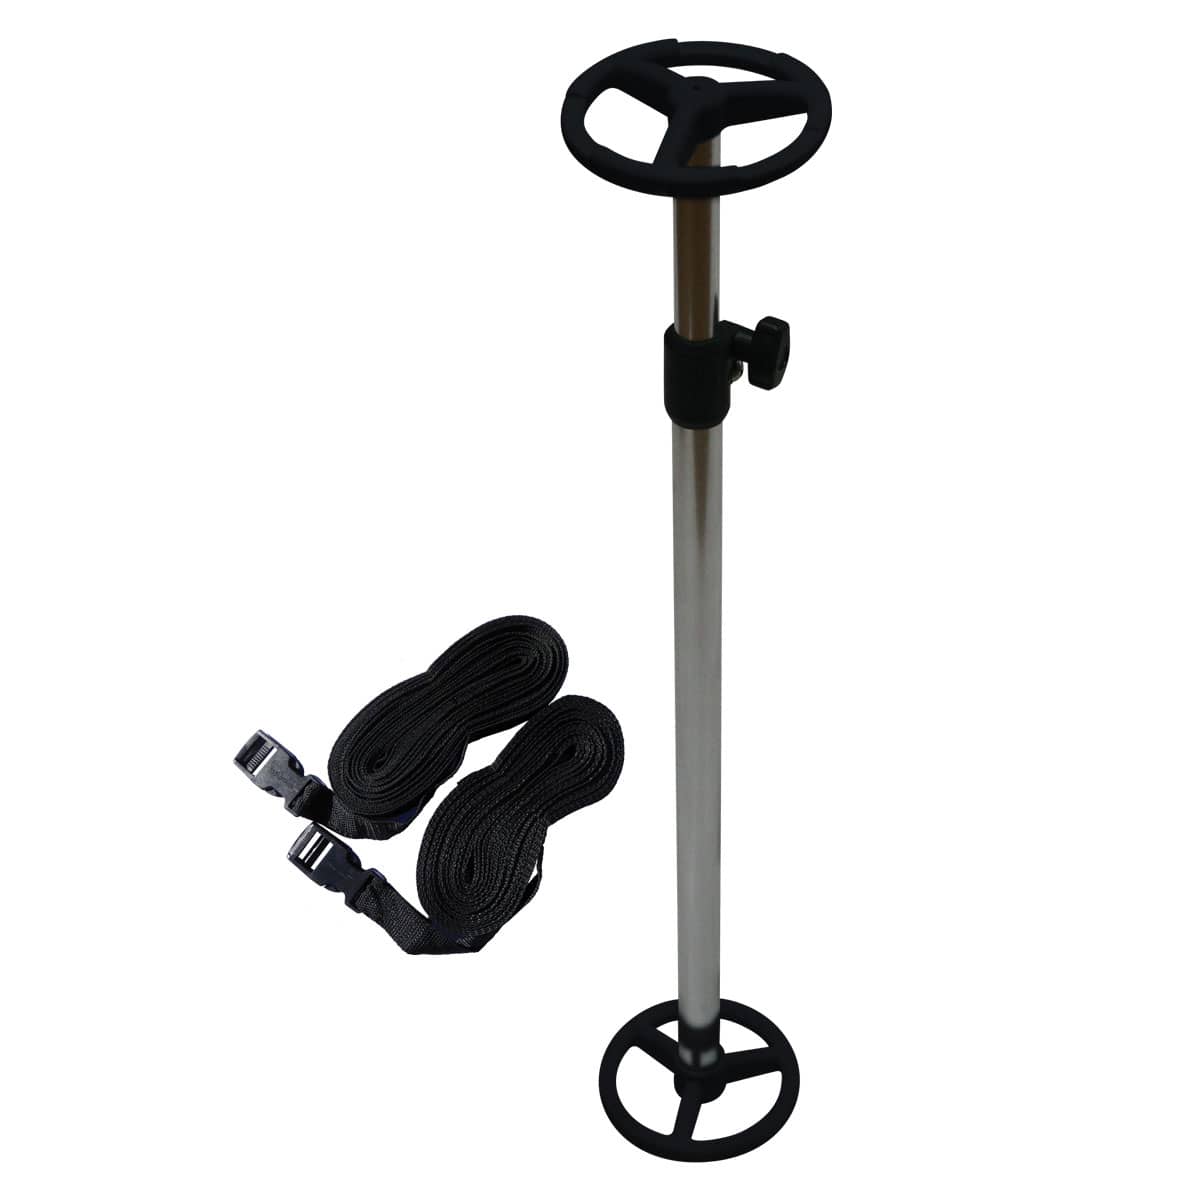 Telescopic Boat Cover Support Pole Kit